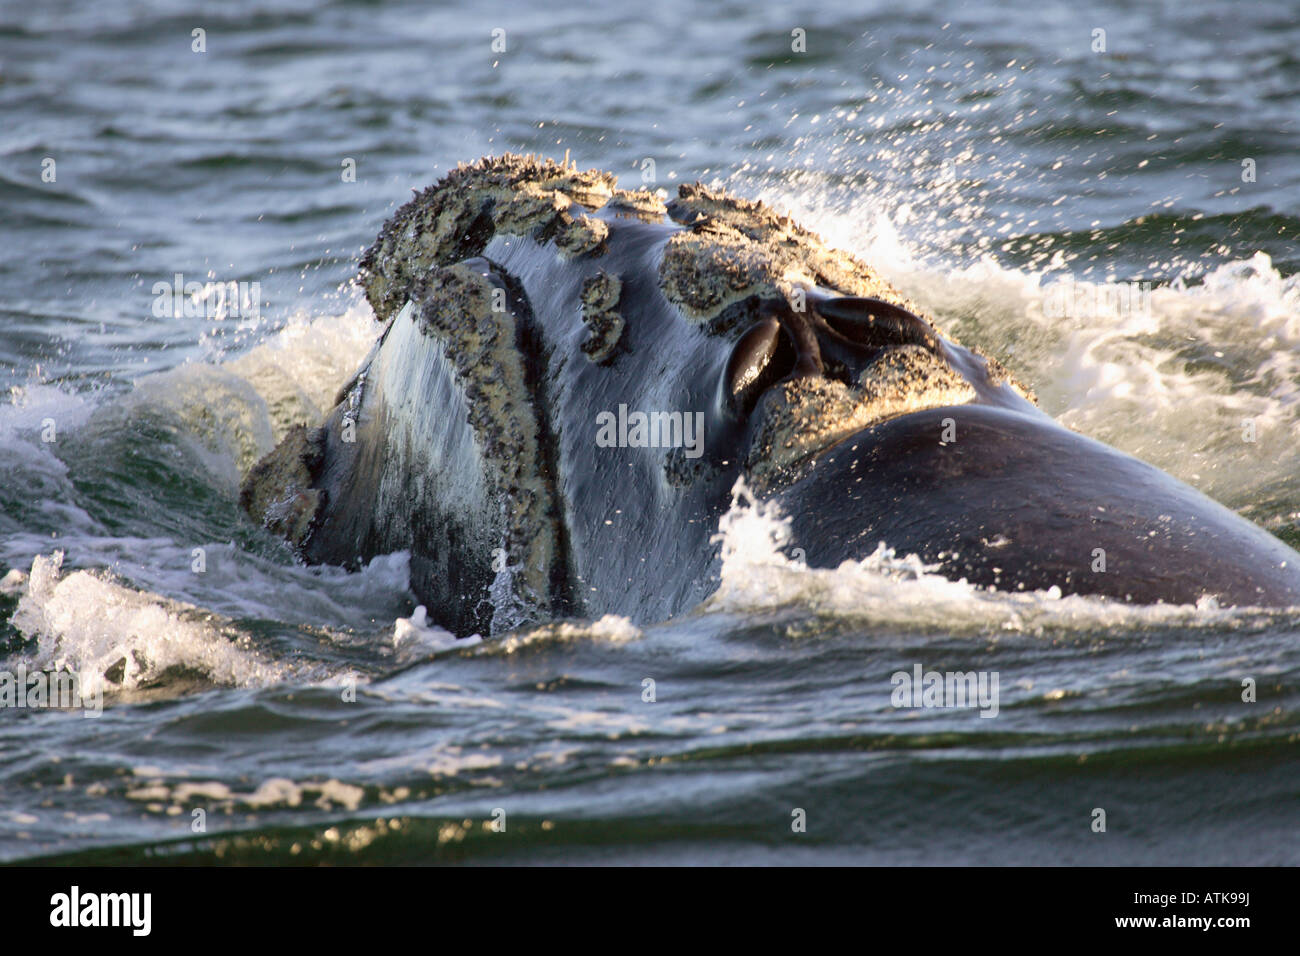 Southern Right Whale Stock Photo